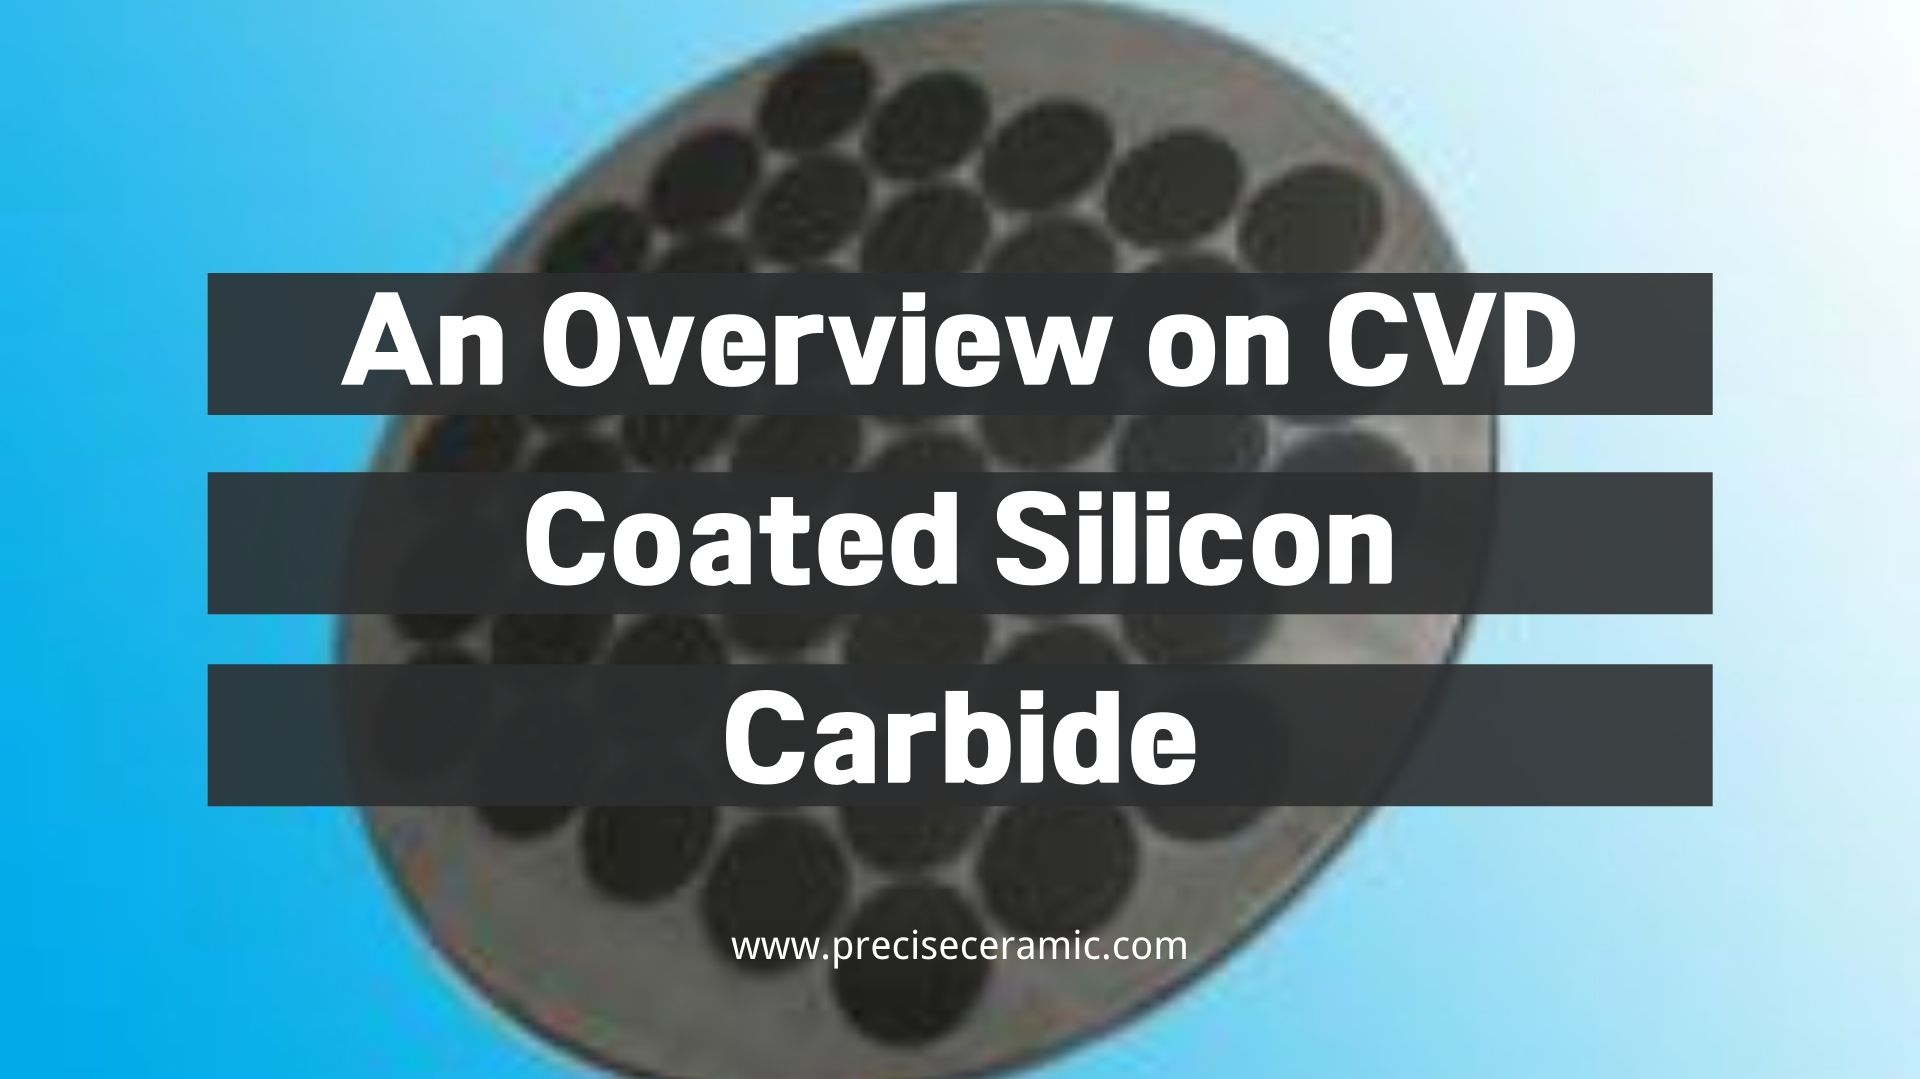 An Overview on CVD Coated Silicon Carbide